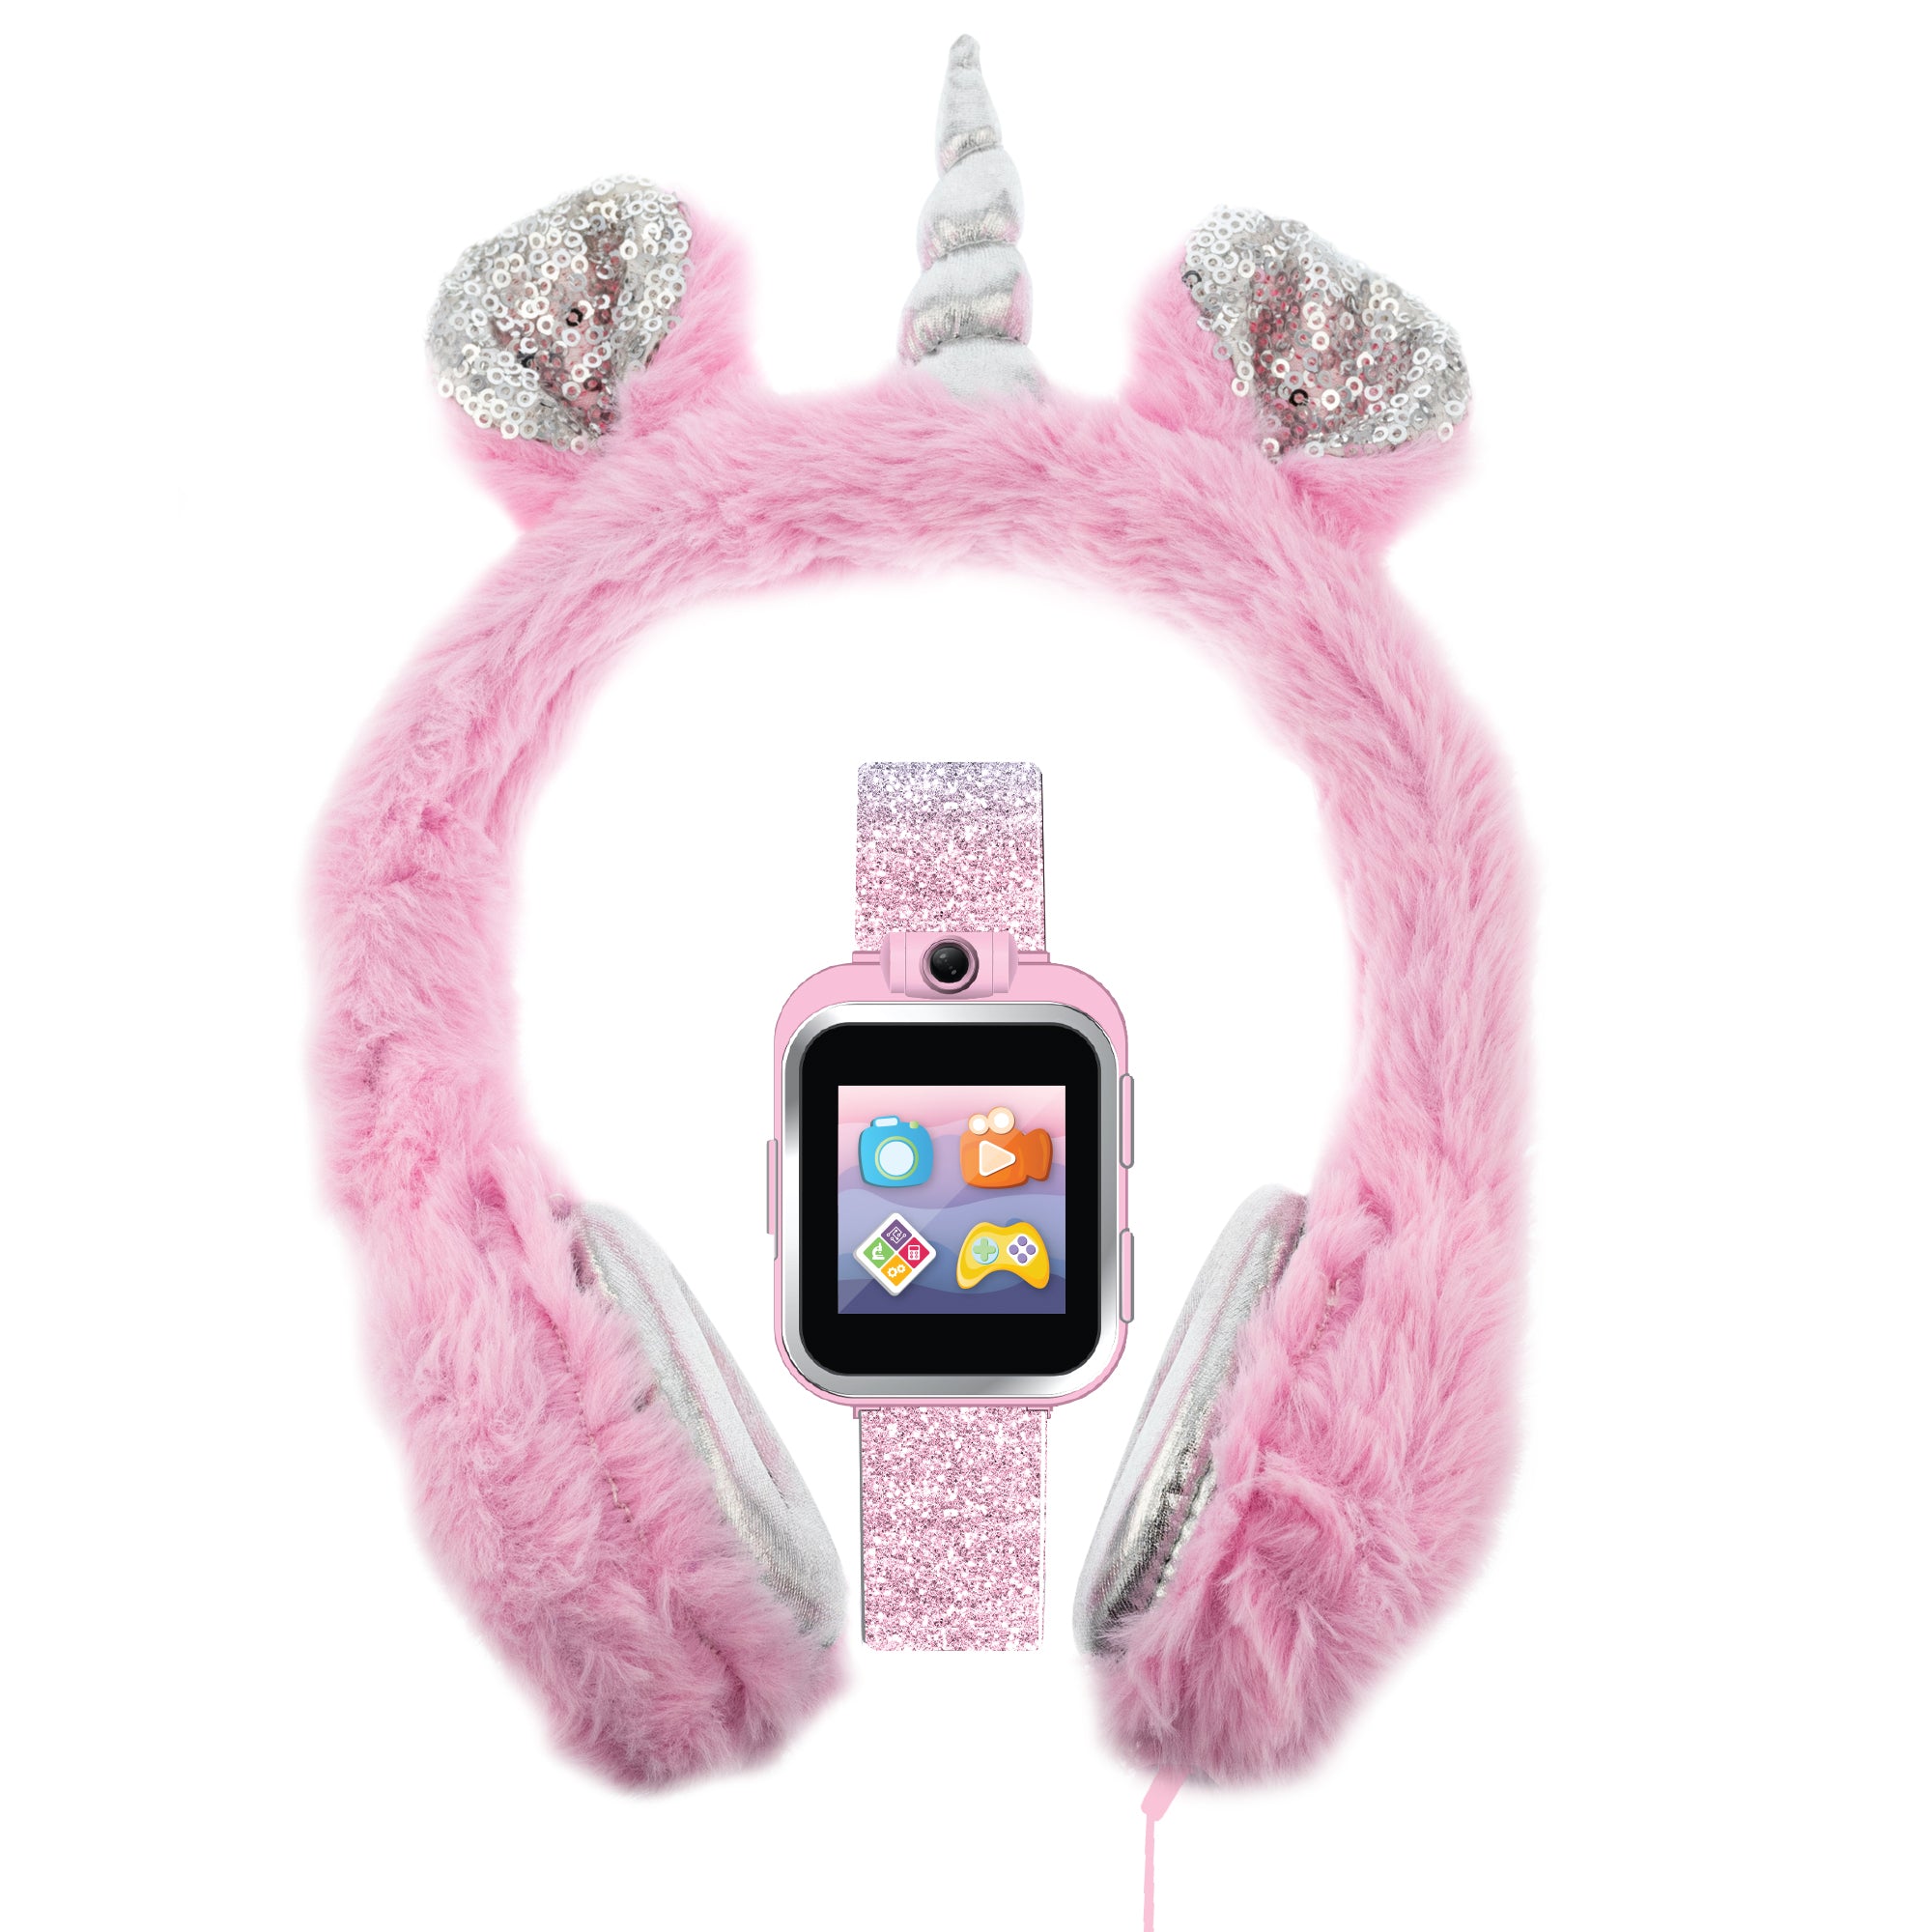 PlayZoom 2 Kids Smartwatch with Headphones: Blush Glitter Fuzzy Unicorn affordable smart watch with headphones